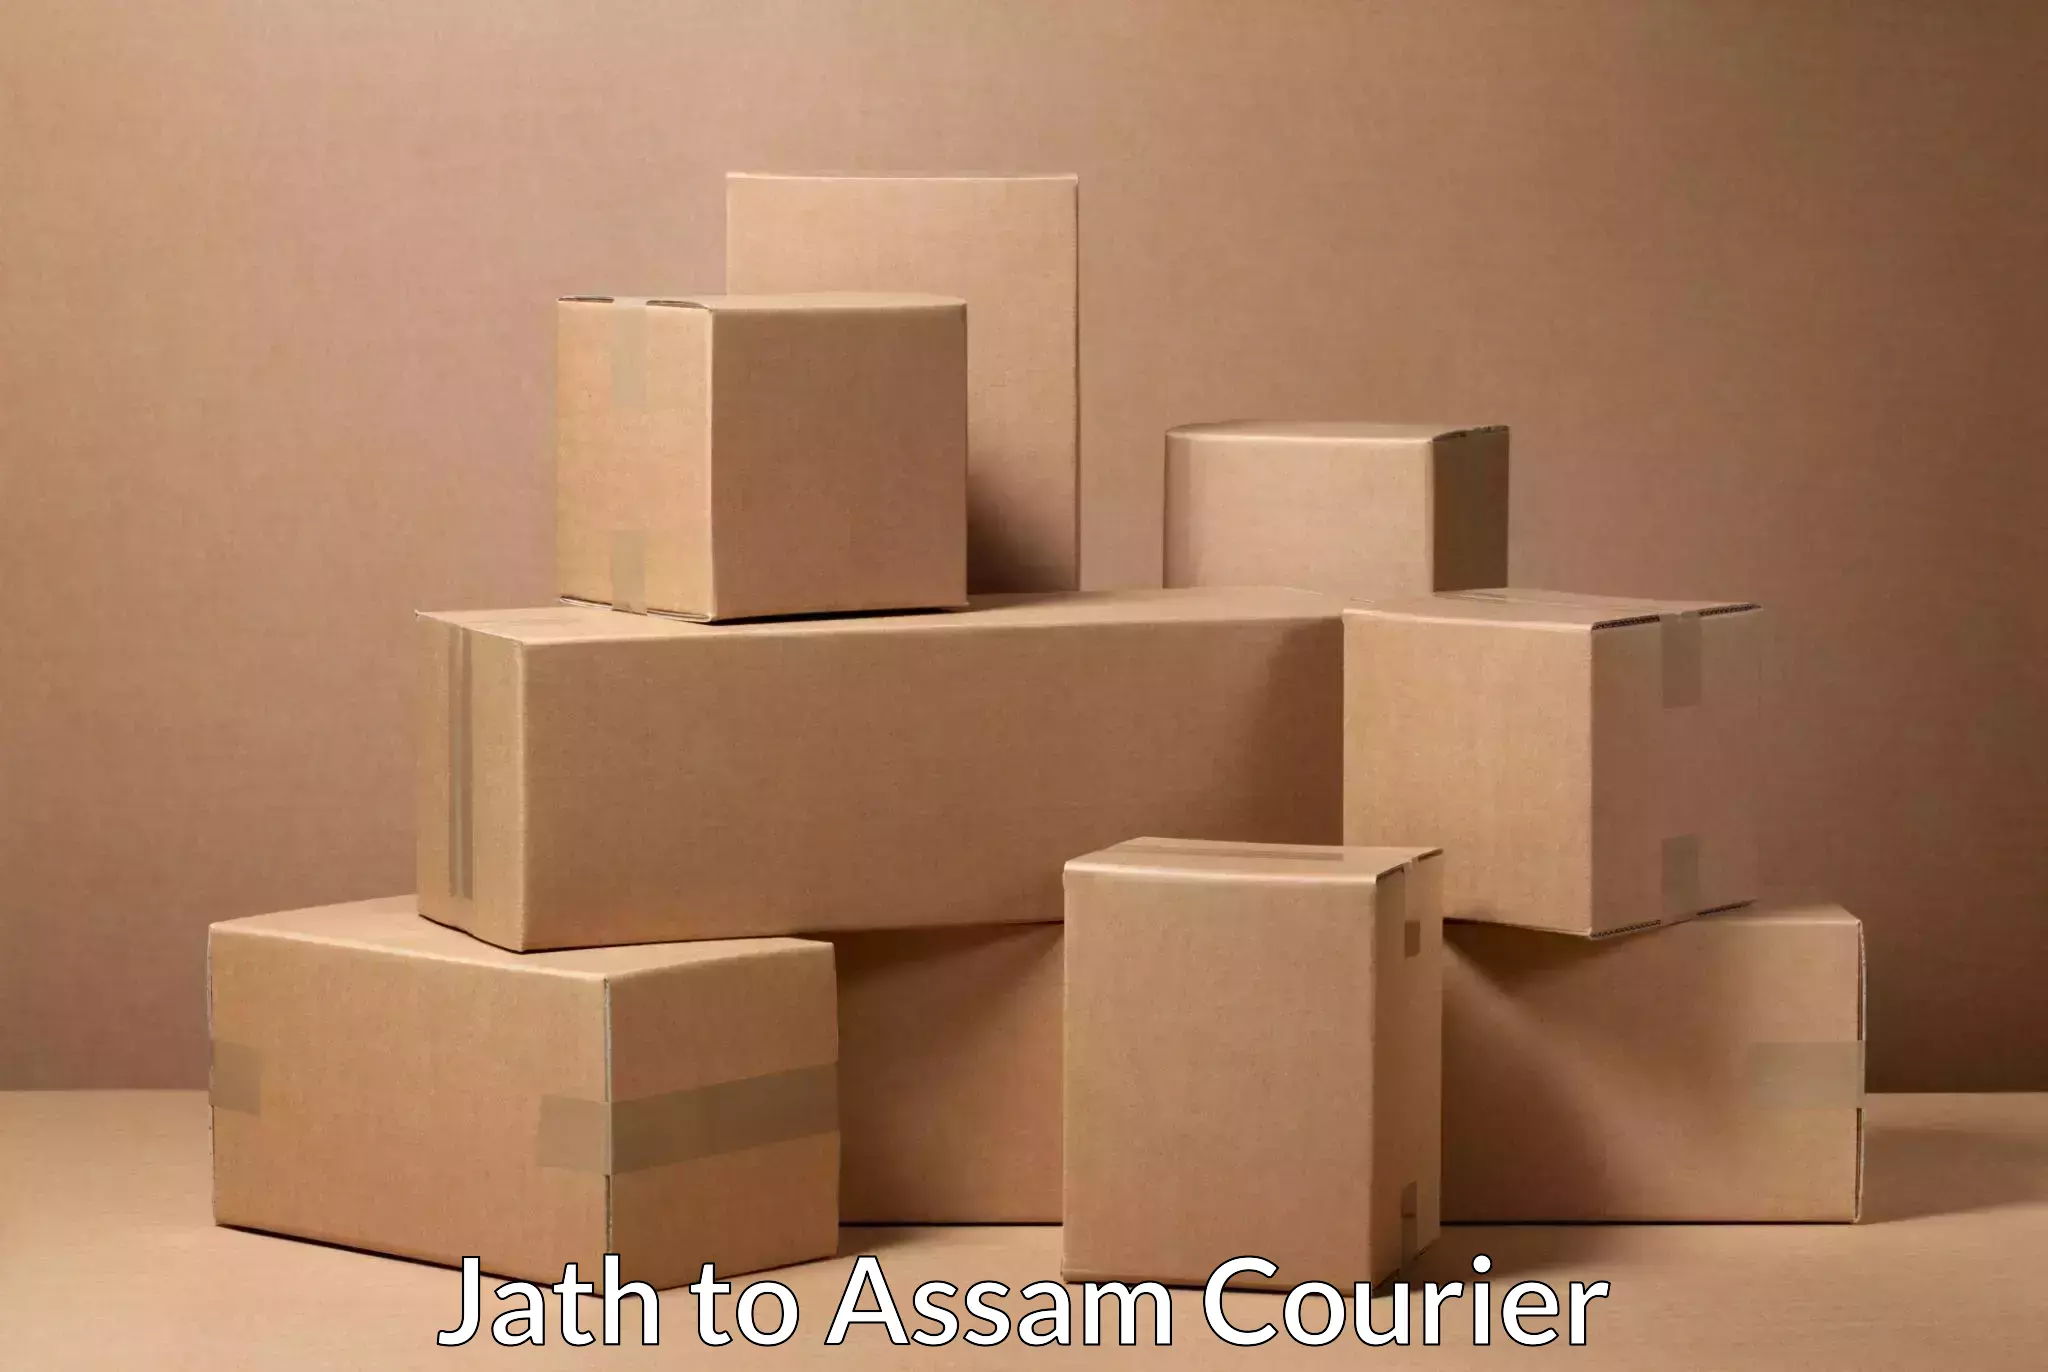 End-to-end delivery Jath to Assam